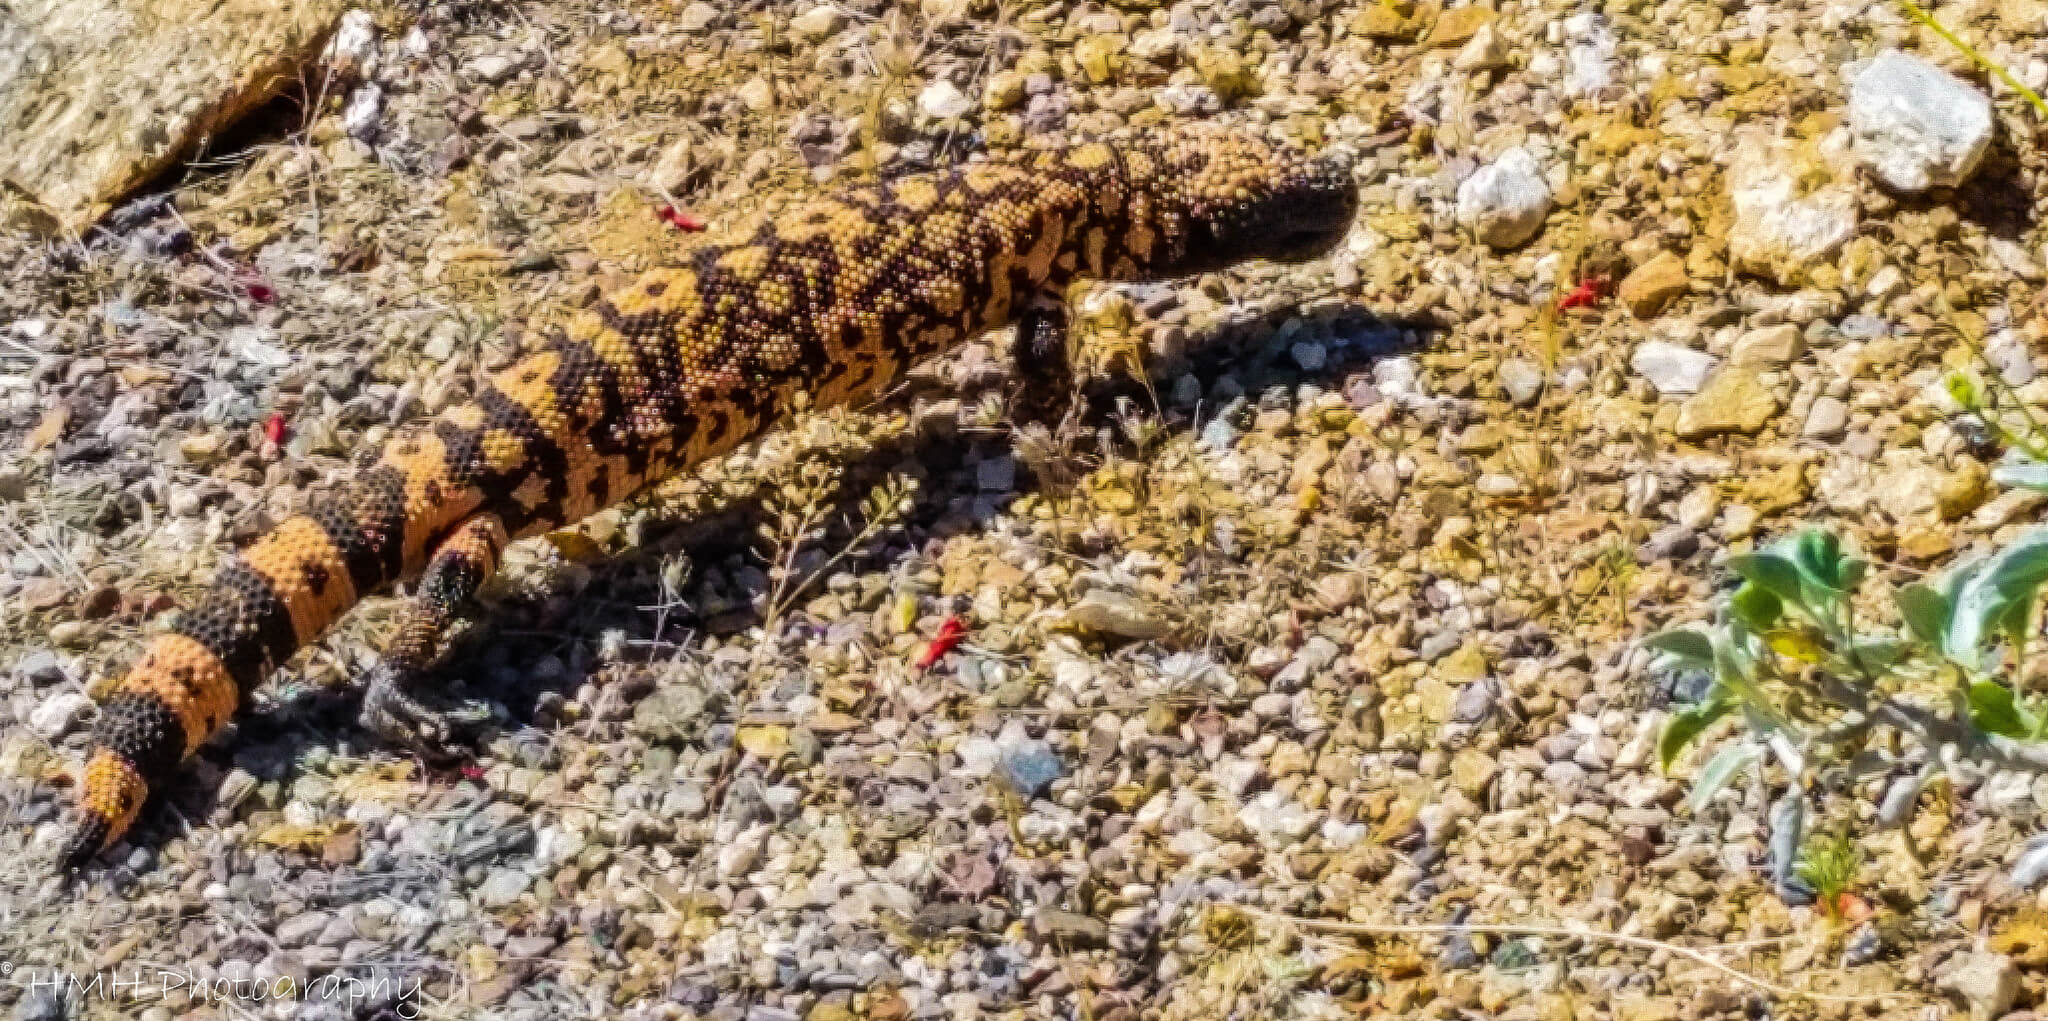 Yellow and black Gila monster on the desert ground.
Flickr User Holly Zimmerman-Hill